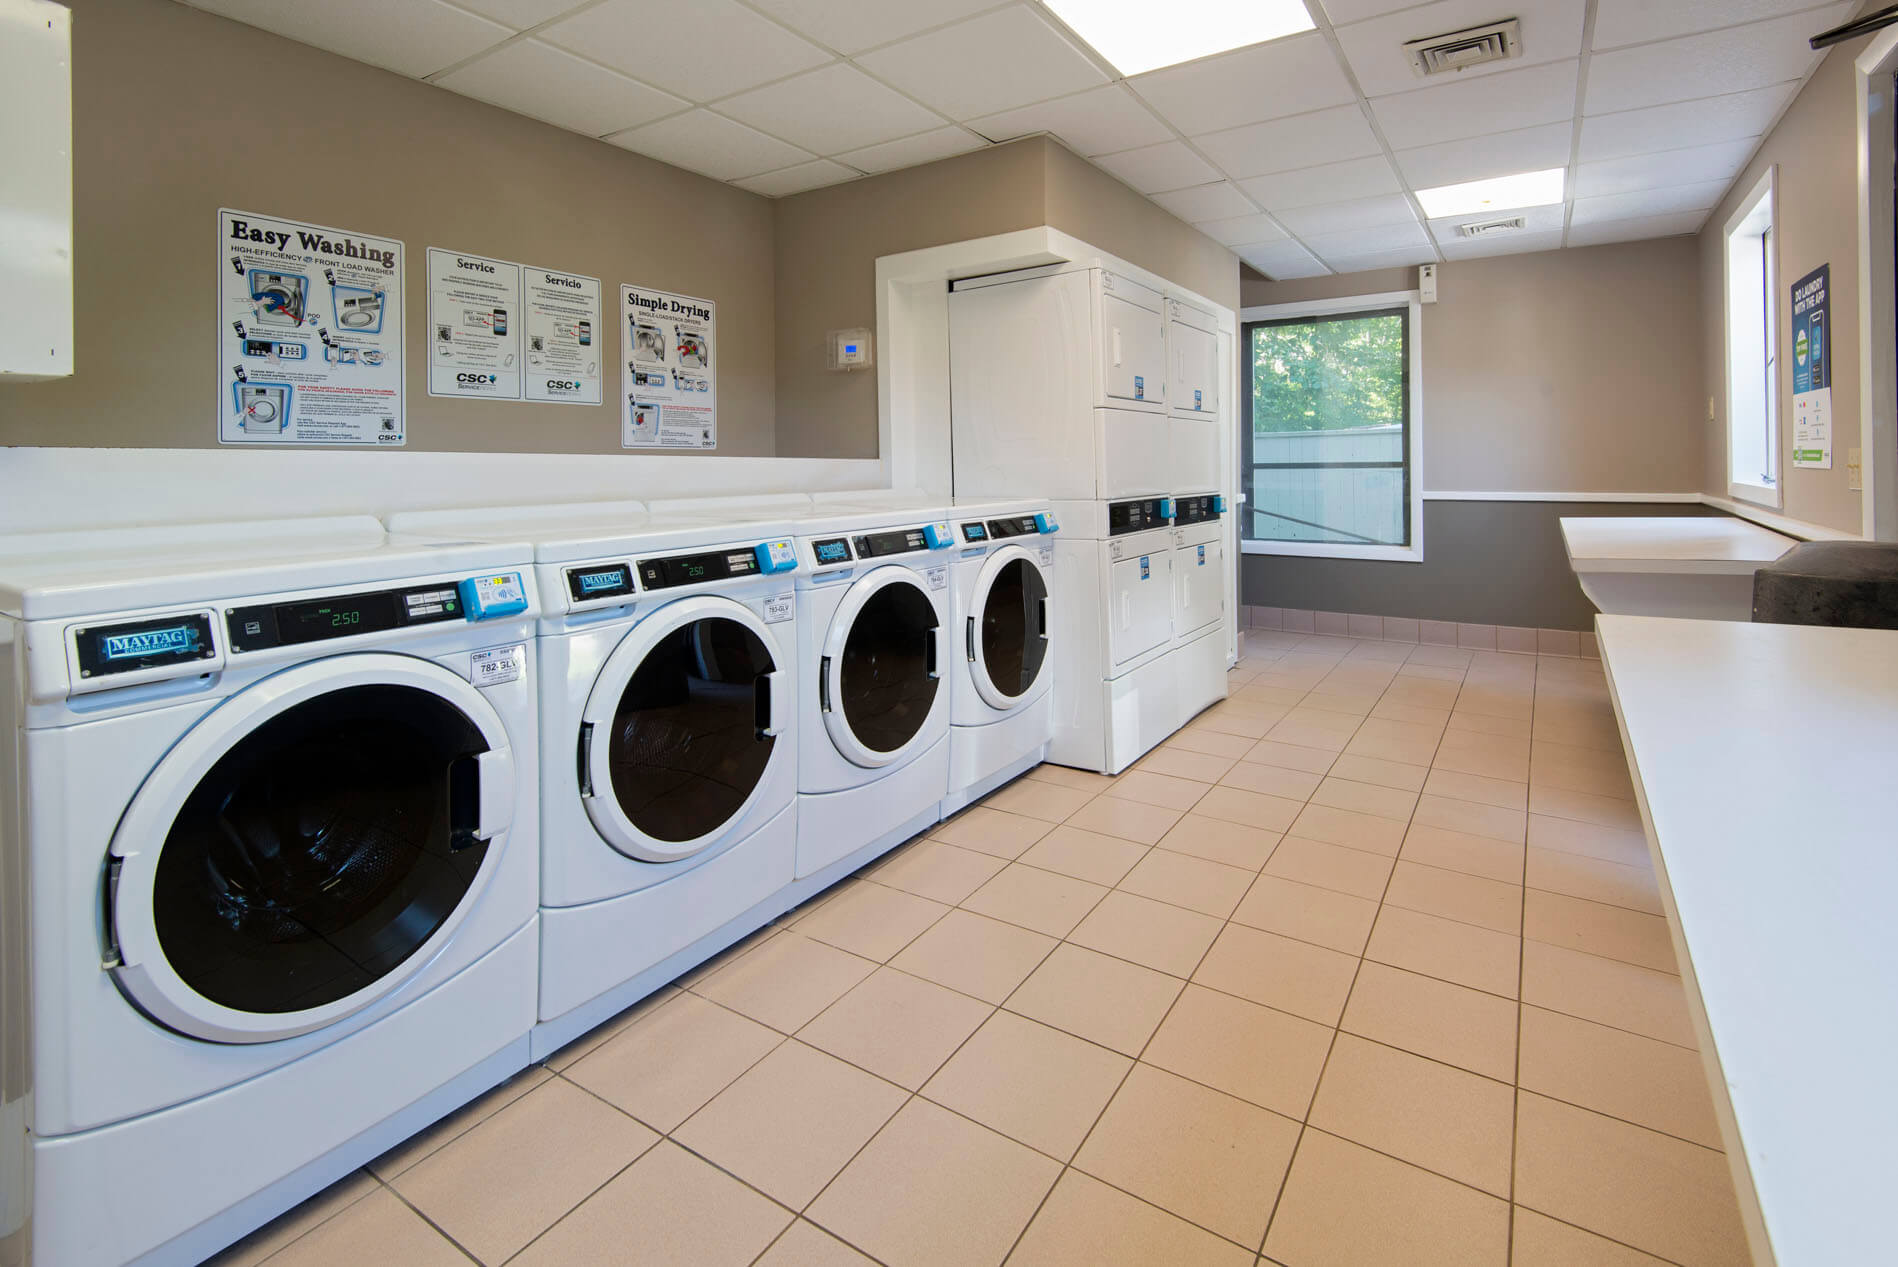 Commons At Windsor Laundry Room